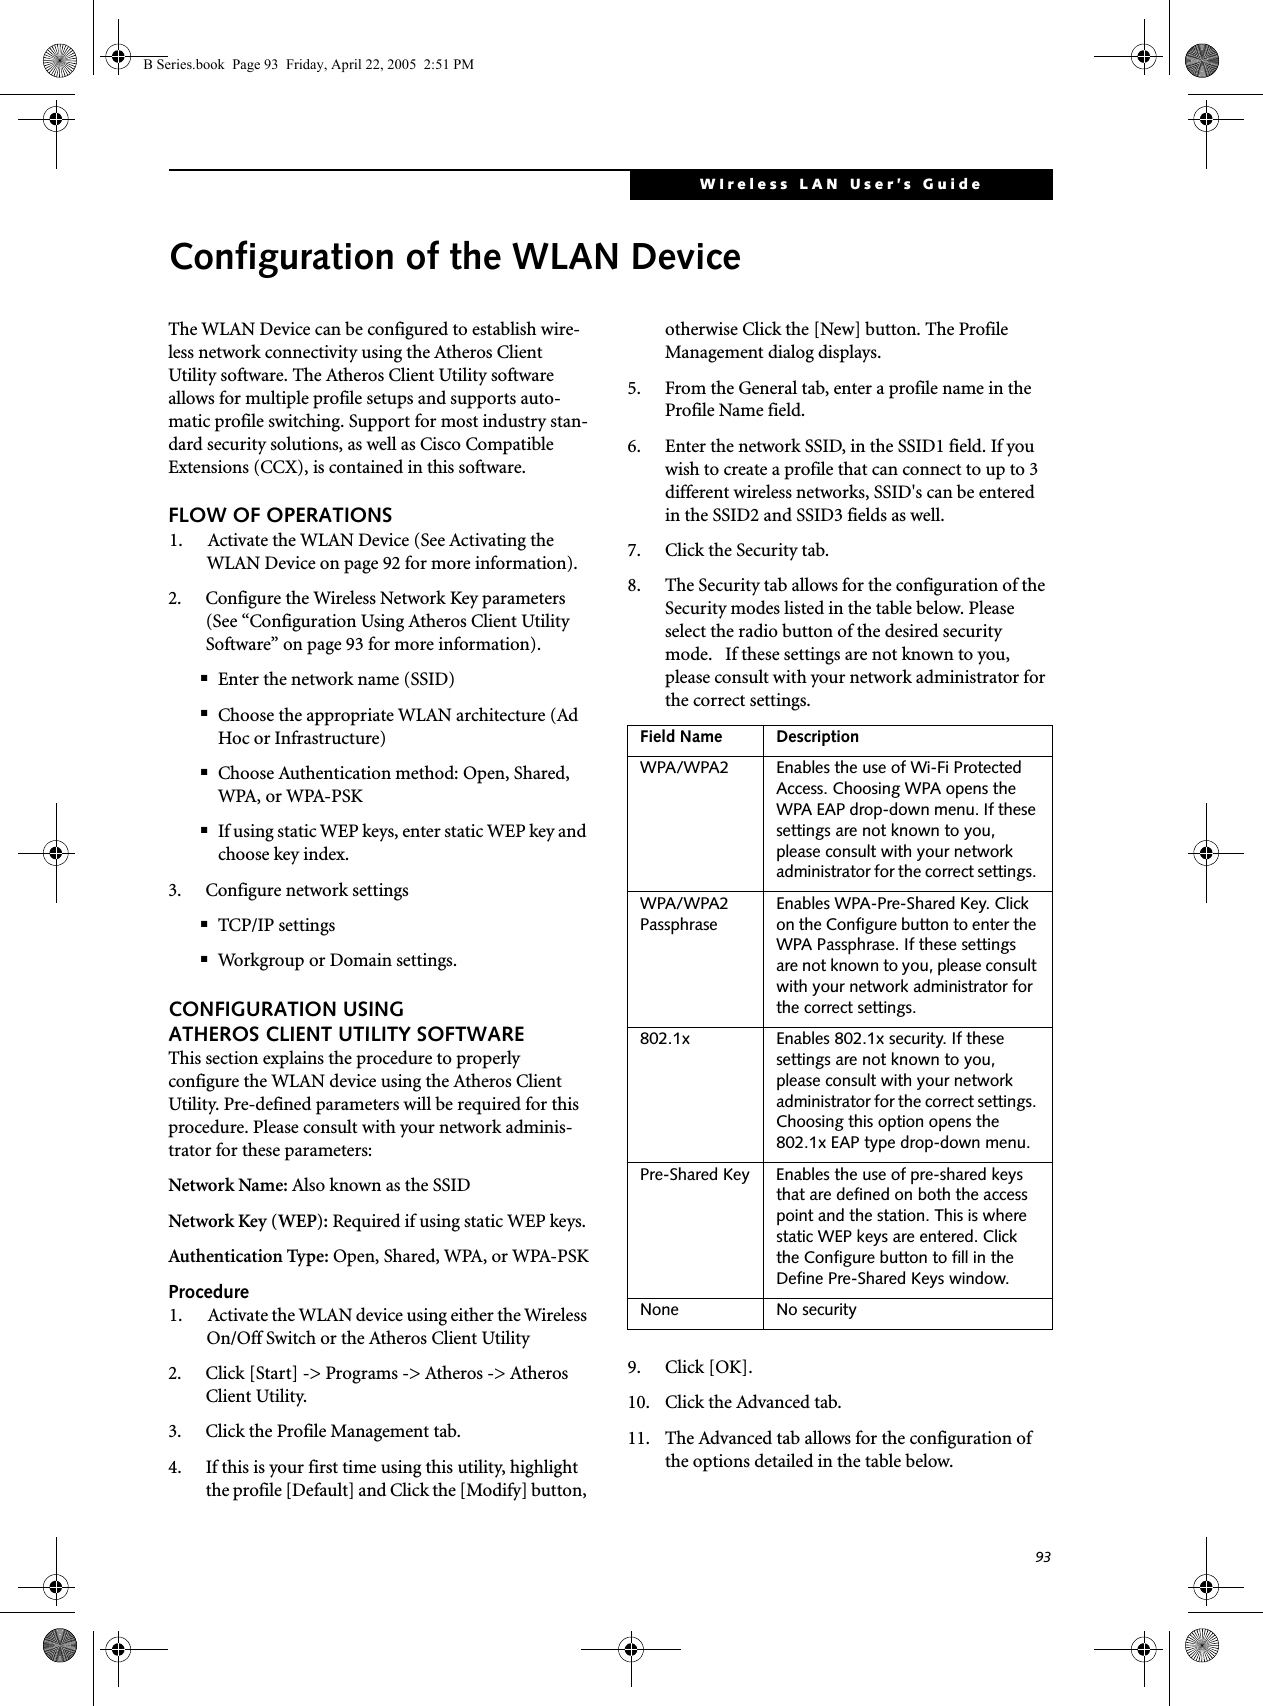 93WIreless LAN User’s Guide Configuration of the WLAN DeviceThe WLAN Device can be configured to establish wire-less network connectivity using the Atheros Client Utility software. The Atheros Client Utility software  allows for multiple profile setups and supports auto-matic profile switching. Support for most industry stan-dard security solutions, as well as Cisco Compatible Extensions (CCX), is contained in this software.FLOW OF OPERATIONS1. Activate the WLAN Device (See Activating the WLAN Device on page 92 for more information).2. Configure the Wireless Network Key parameters (See “Configuration Using Atheros Client Utility Software” on page 93 for more information).■Enter the network name (SSID)■Choose the appropriate WLAN architecture (Ad Hoc or Infrastructure)■Choose Authentication method: Open, Shared, WPA, or WPA-PSK■If using static WEP keys, enter static WEP key and choose key index. 3. Configure network settings■TCP/IP settings■Workgroup or Domain settings.CONFIGURATION USING ATHEROS CLIENT UTILITY SOFTWAREThis section explains the procedure to properly configure the WLAN device using the Atheros Client Utility. Pre-defined parameters will be required for this procedure. Please consult with your network adminis-trator for these parameters:Network Name: Also known as the SSIDNetwork Key (WEP): Required if using static WEP keys. Authentication Type: Open, Shared, WPA, or WPA-PSKProcedure1. Activate the WLAN device using either the Wireless On/Off Switch or the Atheros Client Utility2. Click [Start] -&gt; Programs -&gt; Atheros -&gt; Atheros Client Utility.3. Click the Profile Management tab. 4. If this is your first time using this utility, highlight the profile [Default] and Click the [Modify] button, otherwise Click the [New] button. The Profile Management dialog displays. 5. From the General tab, enter a profile name in the Profile Name field. 6. Enter the network SSID, in the SSID1 field. If you wish to create a profile that can connect to up to 3 different wireless networks, SSID&apos;s can be entered in the SSID2 and SSID3 fields as well.7. Click the Security tab. 8. The Security tab allows for the configuration of the Security modes listed in the table below. Please select the radio button of the desired security mode.   If these settings are not known to you, please consult with your network administrator for the correct settings. 9. Click [OK].10. Click the Advanced tab.11. The Advanced tab allows for the configuration of the options detailed in the table below.Field Name DescriptionWPA/WPA2 Enables the use of Wi-Fi Protected Access. Choosing WPA opens the WPA EAP drop-down menu. If these settings are not known to you, please consult with your network administrator for the correct settings. WPA/WPA2 Passphrase Enables WPA-Pre-Shared Key. Click on the Configure button to enter the WPA Passphrase. If these settings are not known to you, please consult with your network administrator for the correct settings. 802.1x Enables 802.1x security. If these settings are not known to you, please consult with your network administrator for the correct settings. Choosing this option opens the 802.1x EAP type drop-down menu.Pre-Shared Key Enables the use of pre-shared keys that are defined on both the access point and the station. This is where static WEP keys are entered. Click the Configure button to fill in the Define Pre-Shared Keys window.None No securityB Series.book  Page 93  Friday, April 22, 2005  2:51 PM